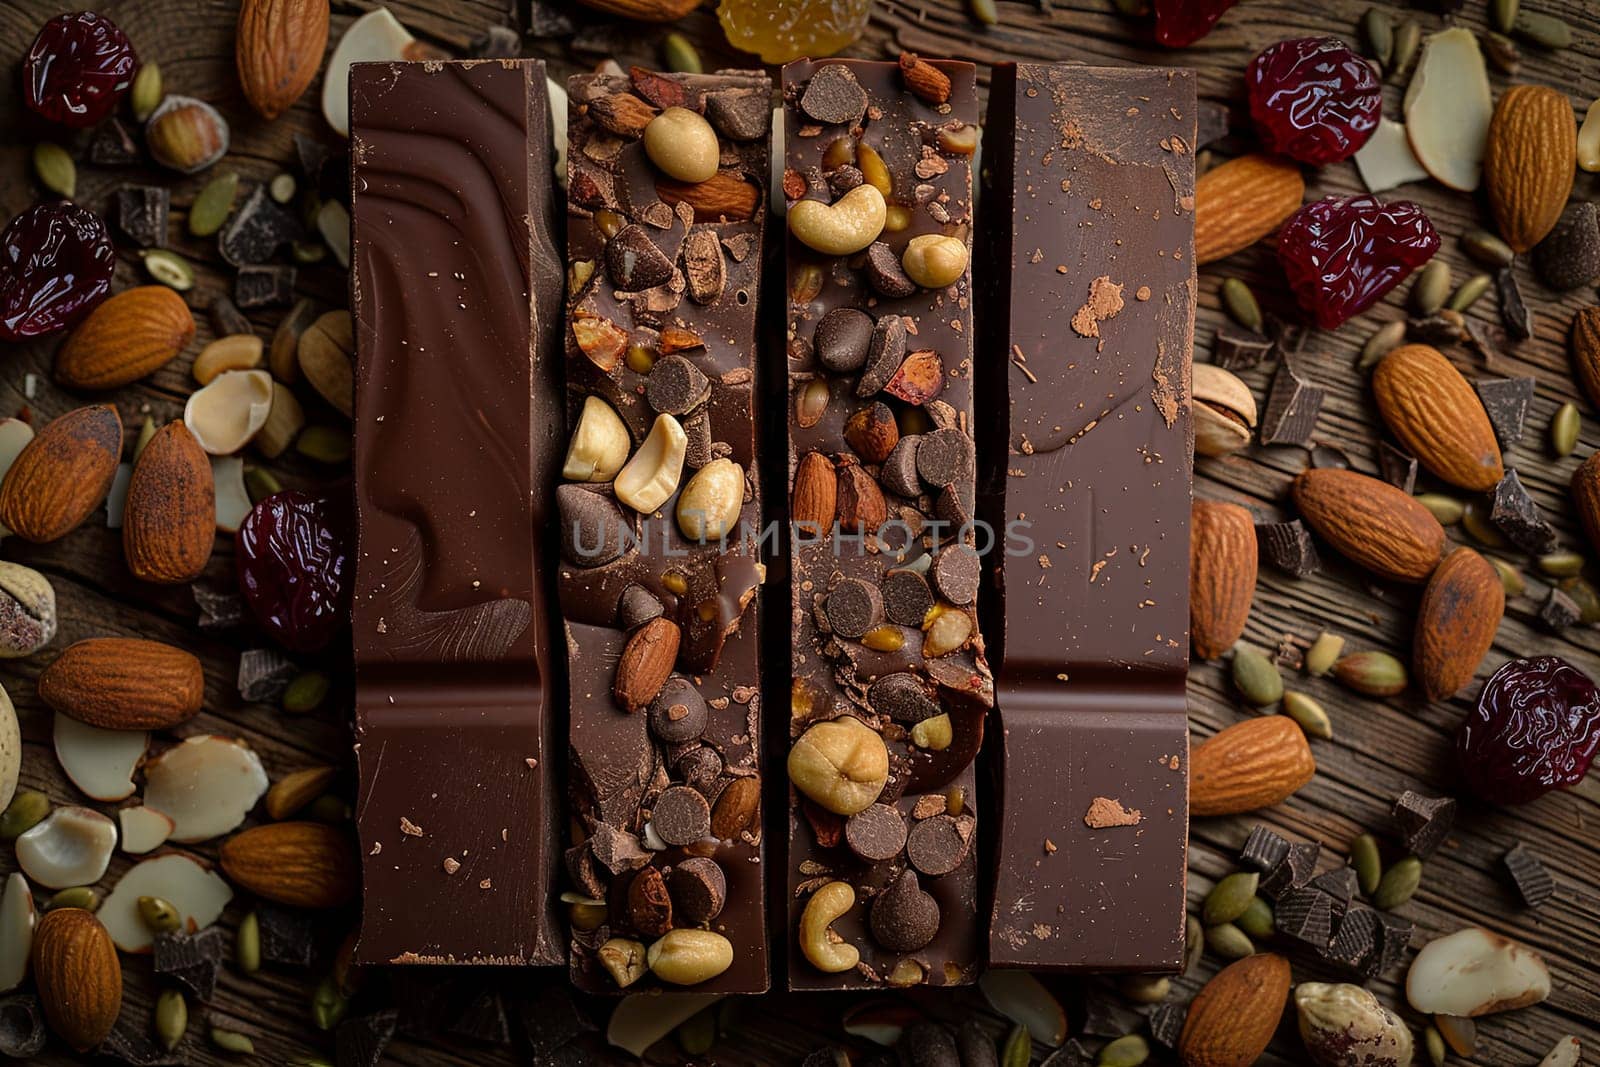 Detailed close-up of a chocolate bar filled with crunchy nuts and dried fruits, showcasing rich textures and natural ingredients.